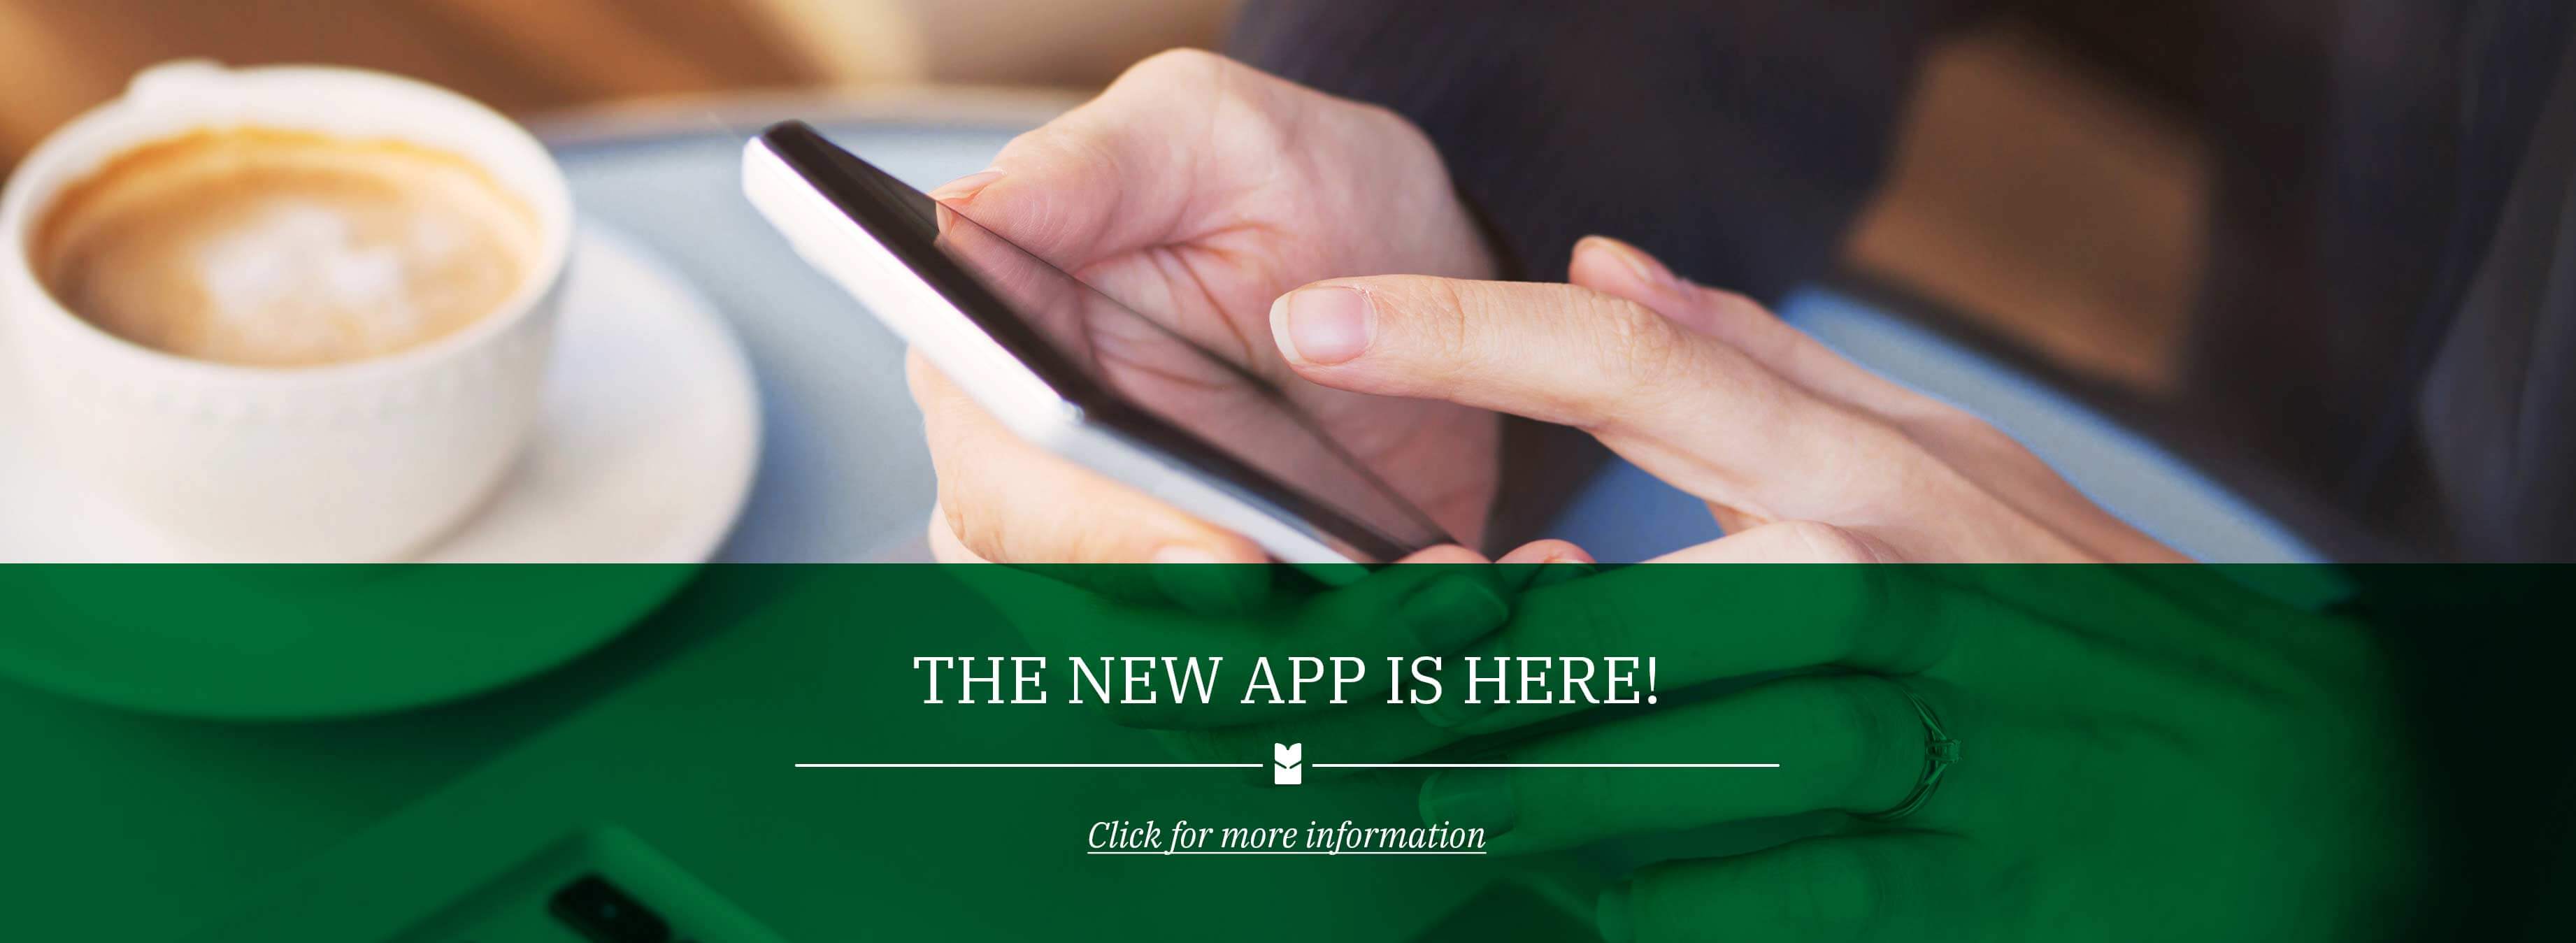 Coming soon: new mobile banking app! Click for more information